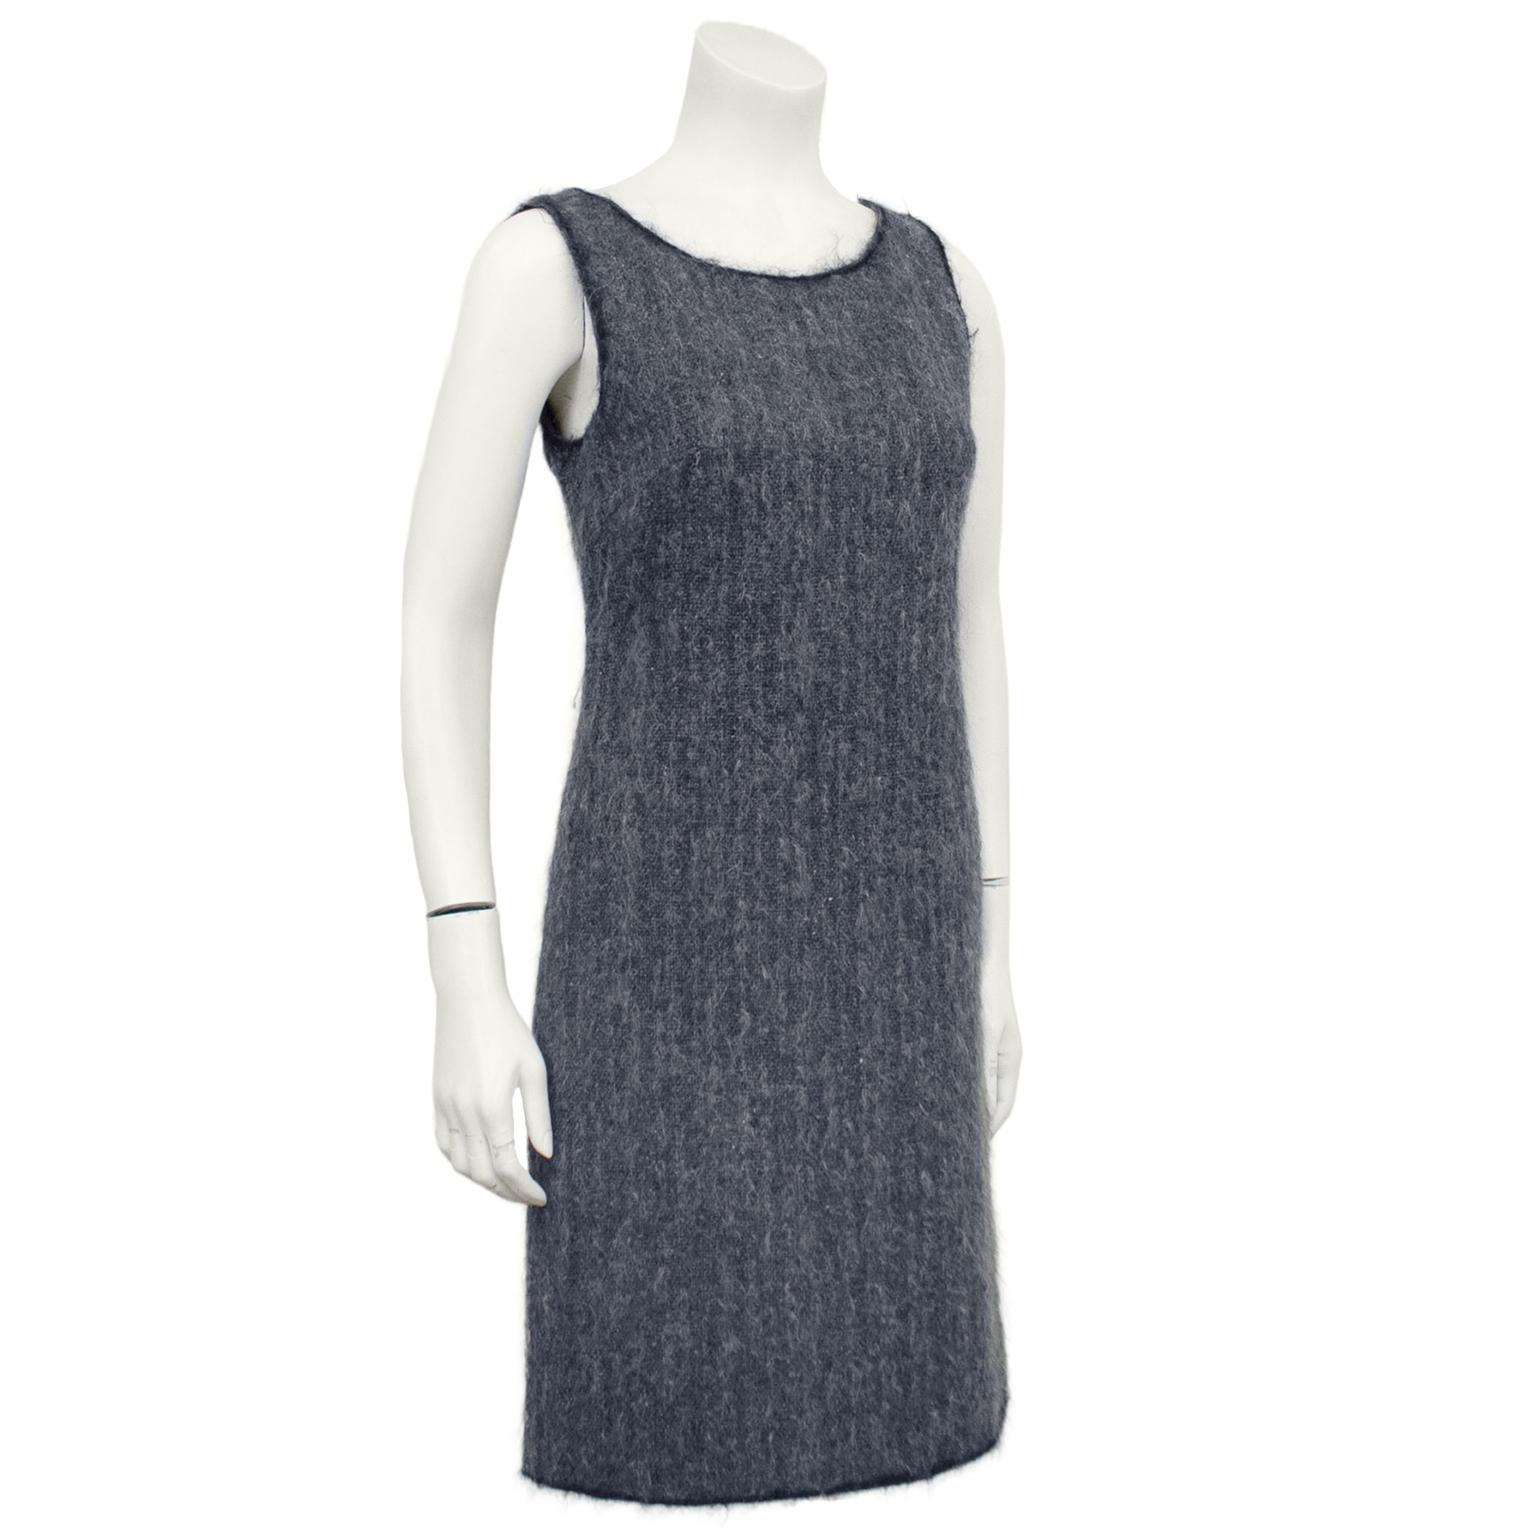 1990s Prada shift dress. Grey wool and mohair with subtle contrasting black trim at the neckline, sleeves and hem. Round neckline and sleeveless. Invisible zipper up centre back. Excellent vintage condition. Fits like a US size 4. Classic shape,